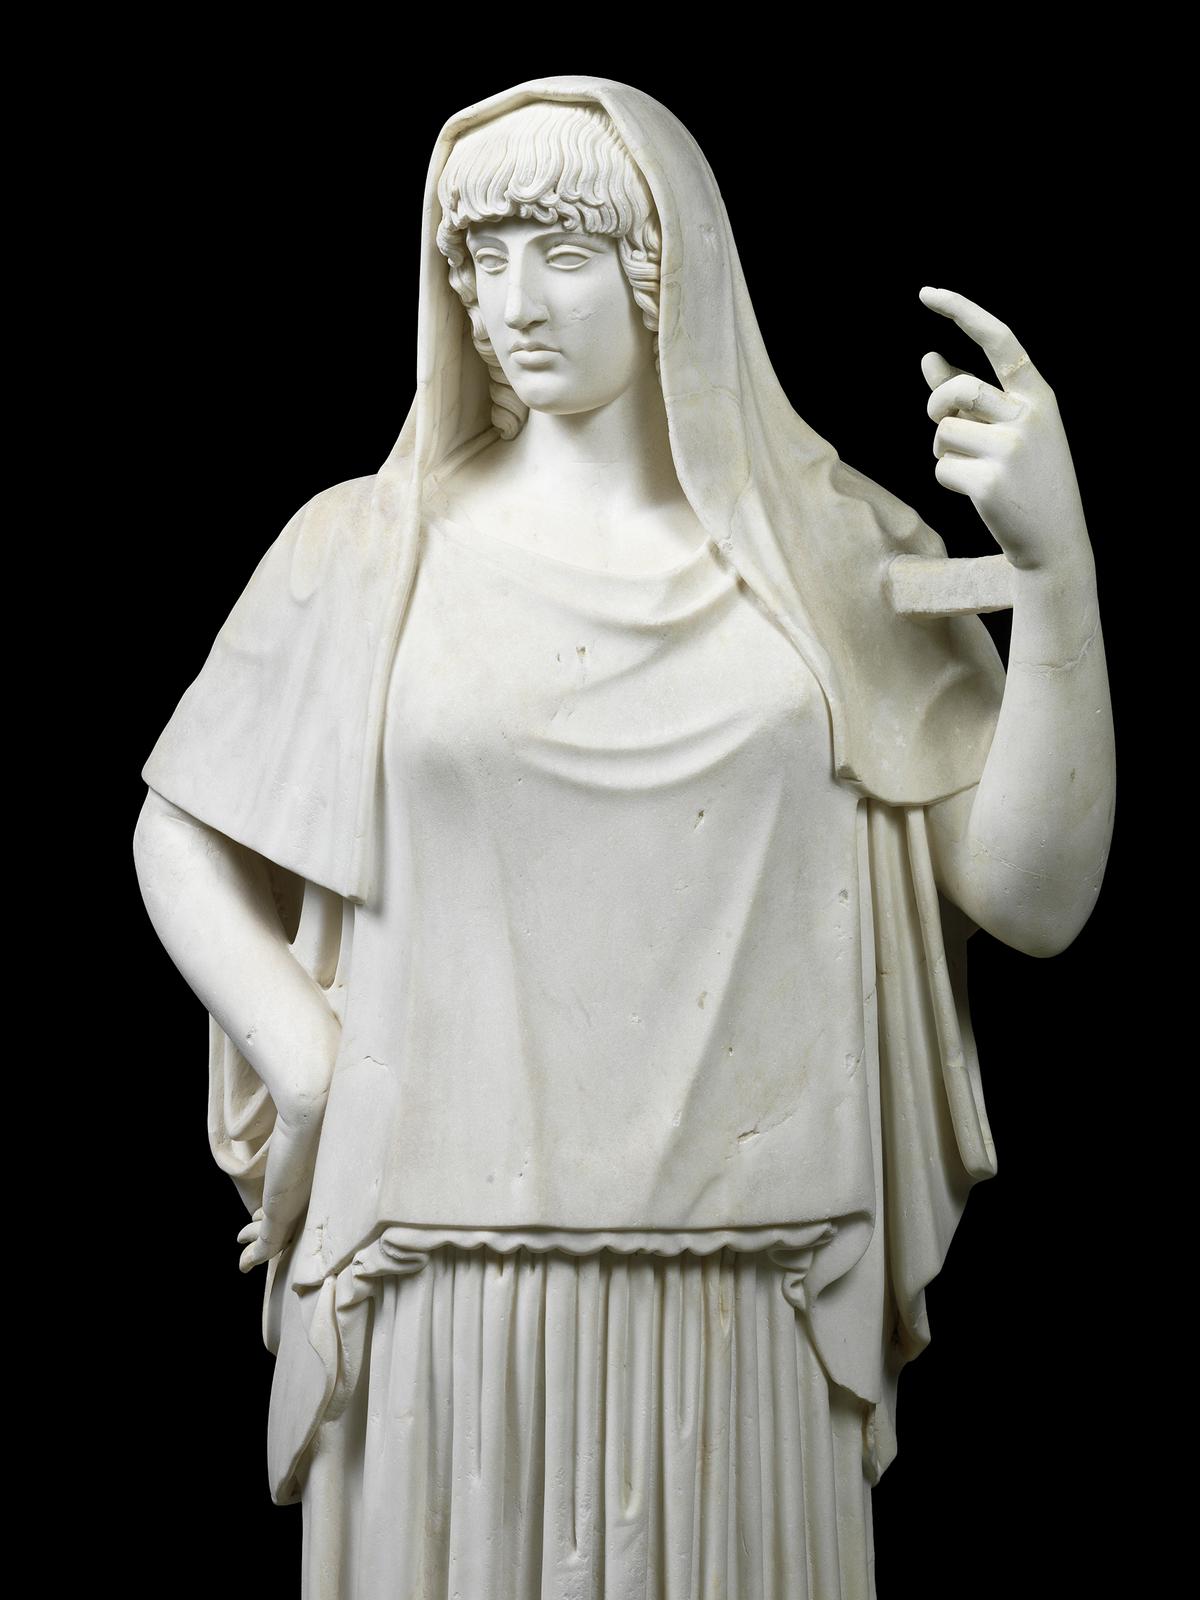 The Torlonia Collection: Stupendously Marvelous Ancient Sculptures